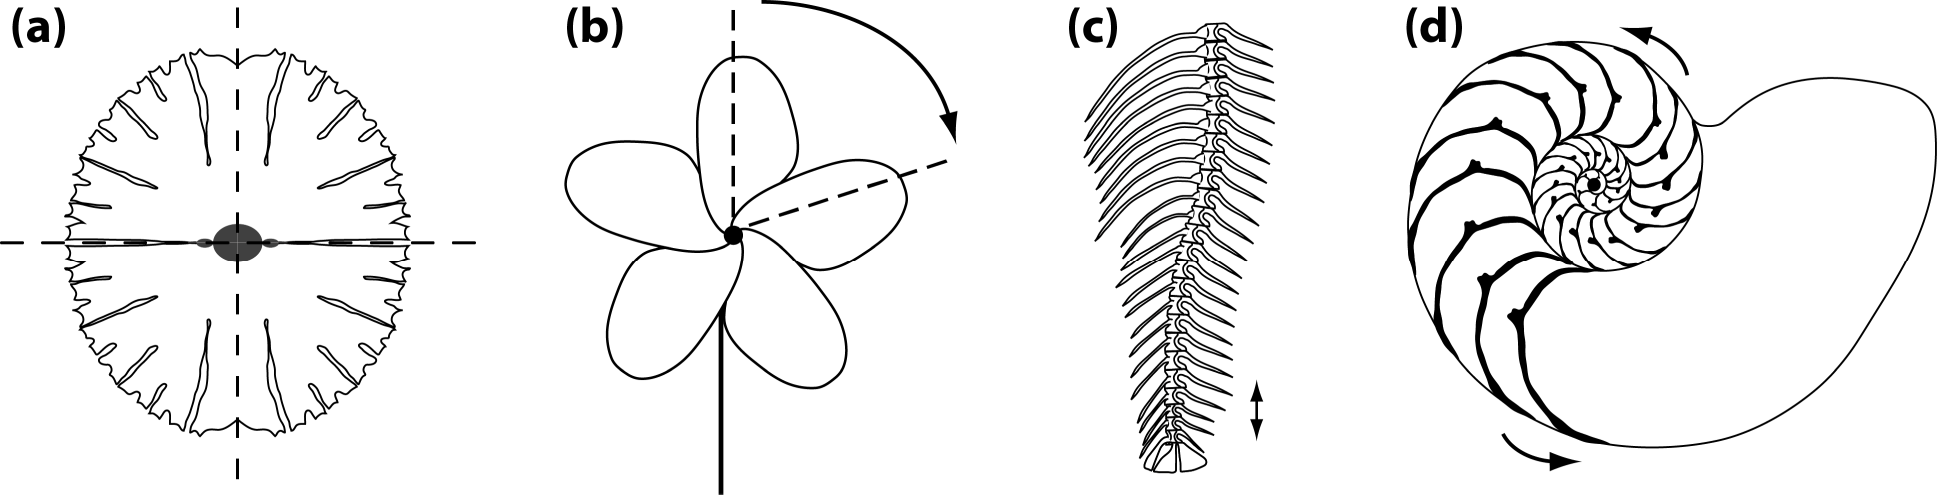 A) Inflorescences and (B) displacement of the anther crest (arrow) in